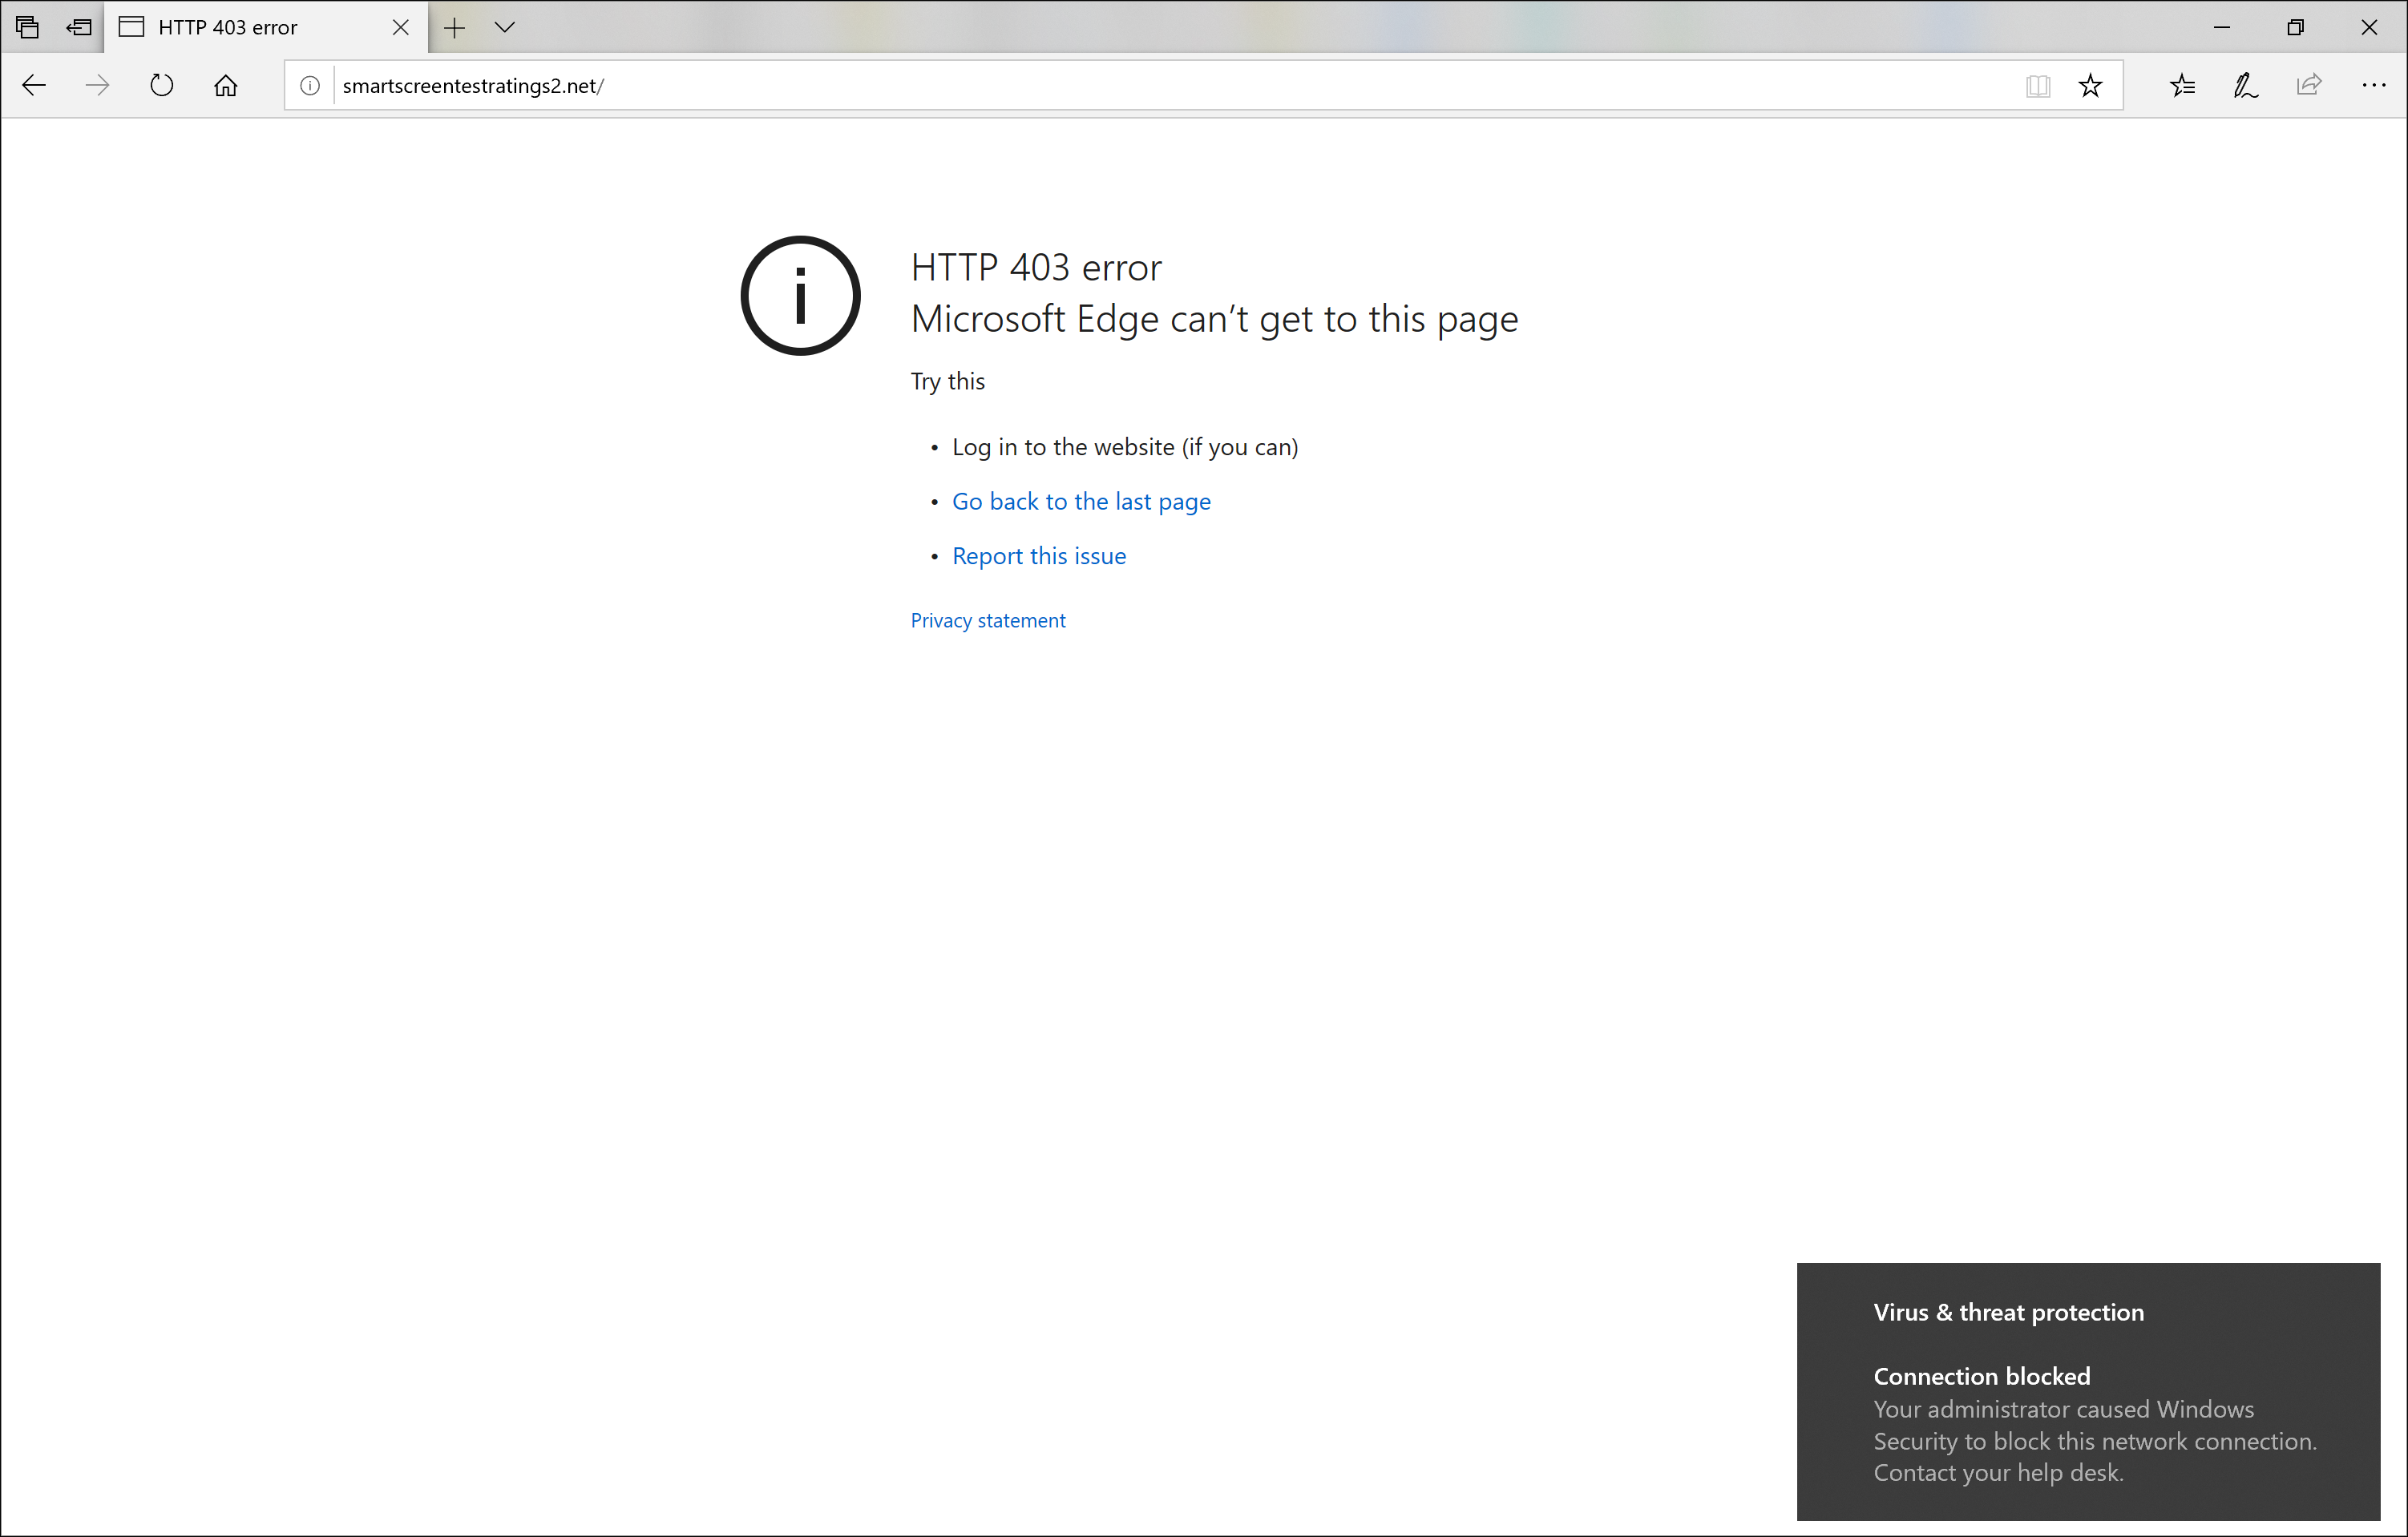 Image of Microsoft Edge showing a 403 error and the Windows notification.